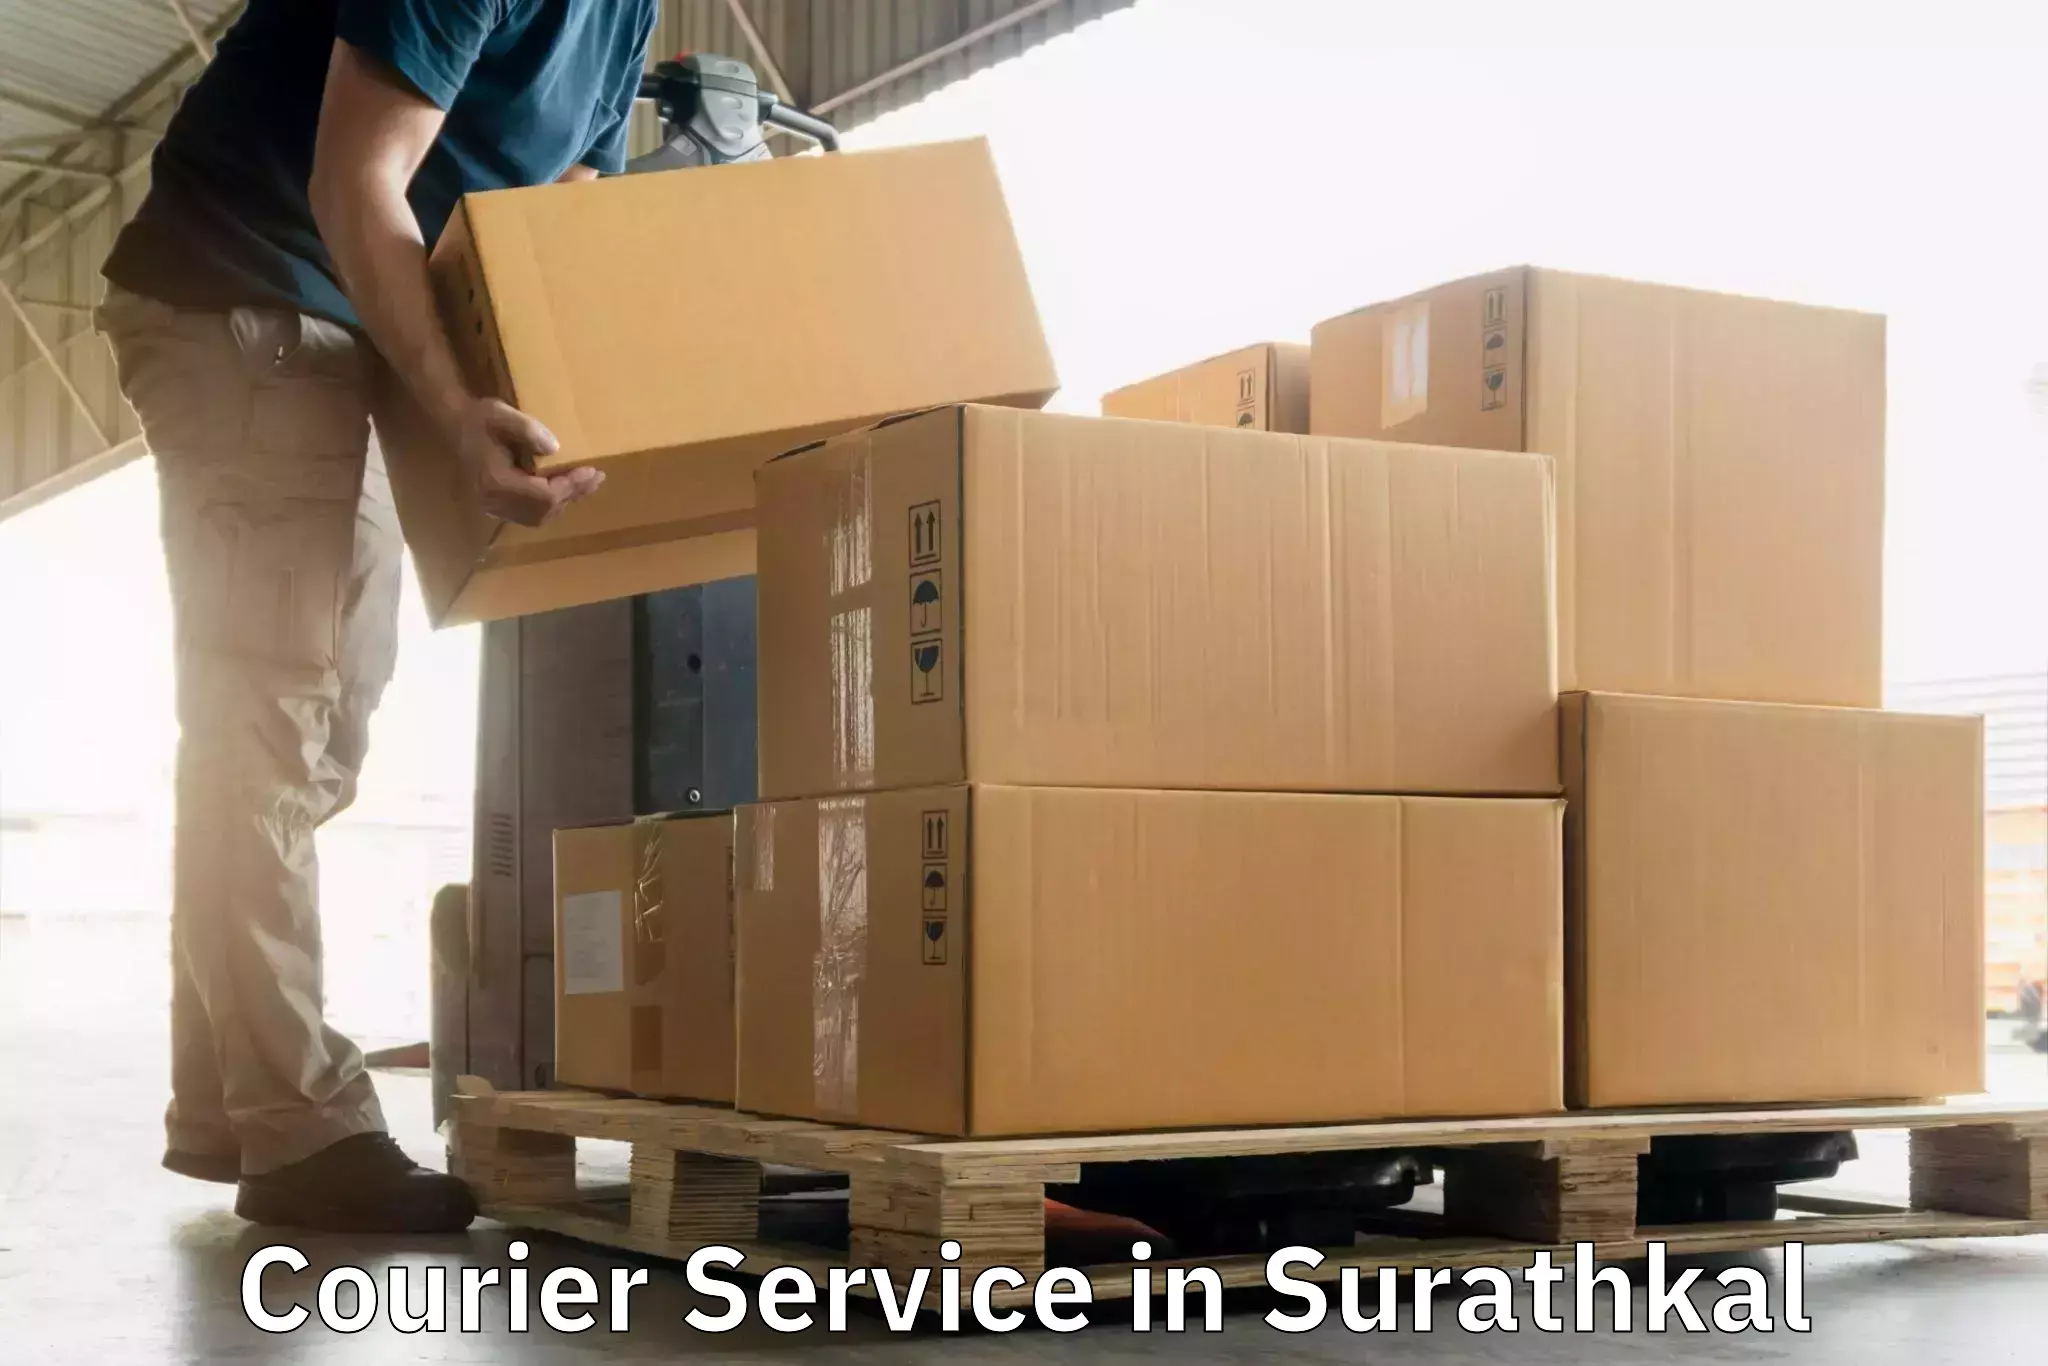 Secure freight services in Surathkal